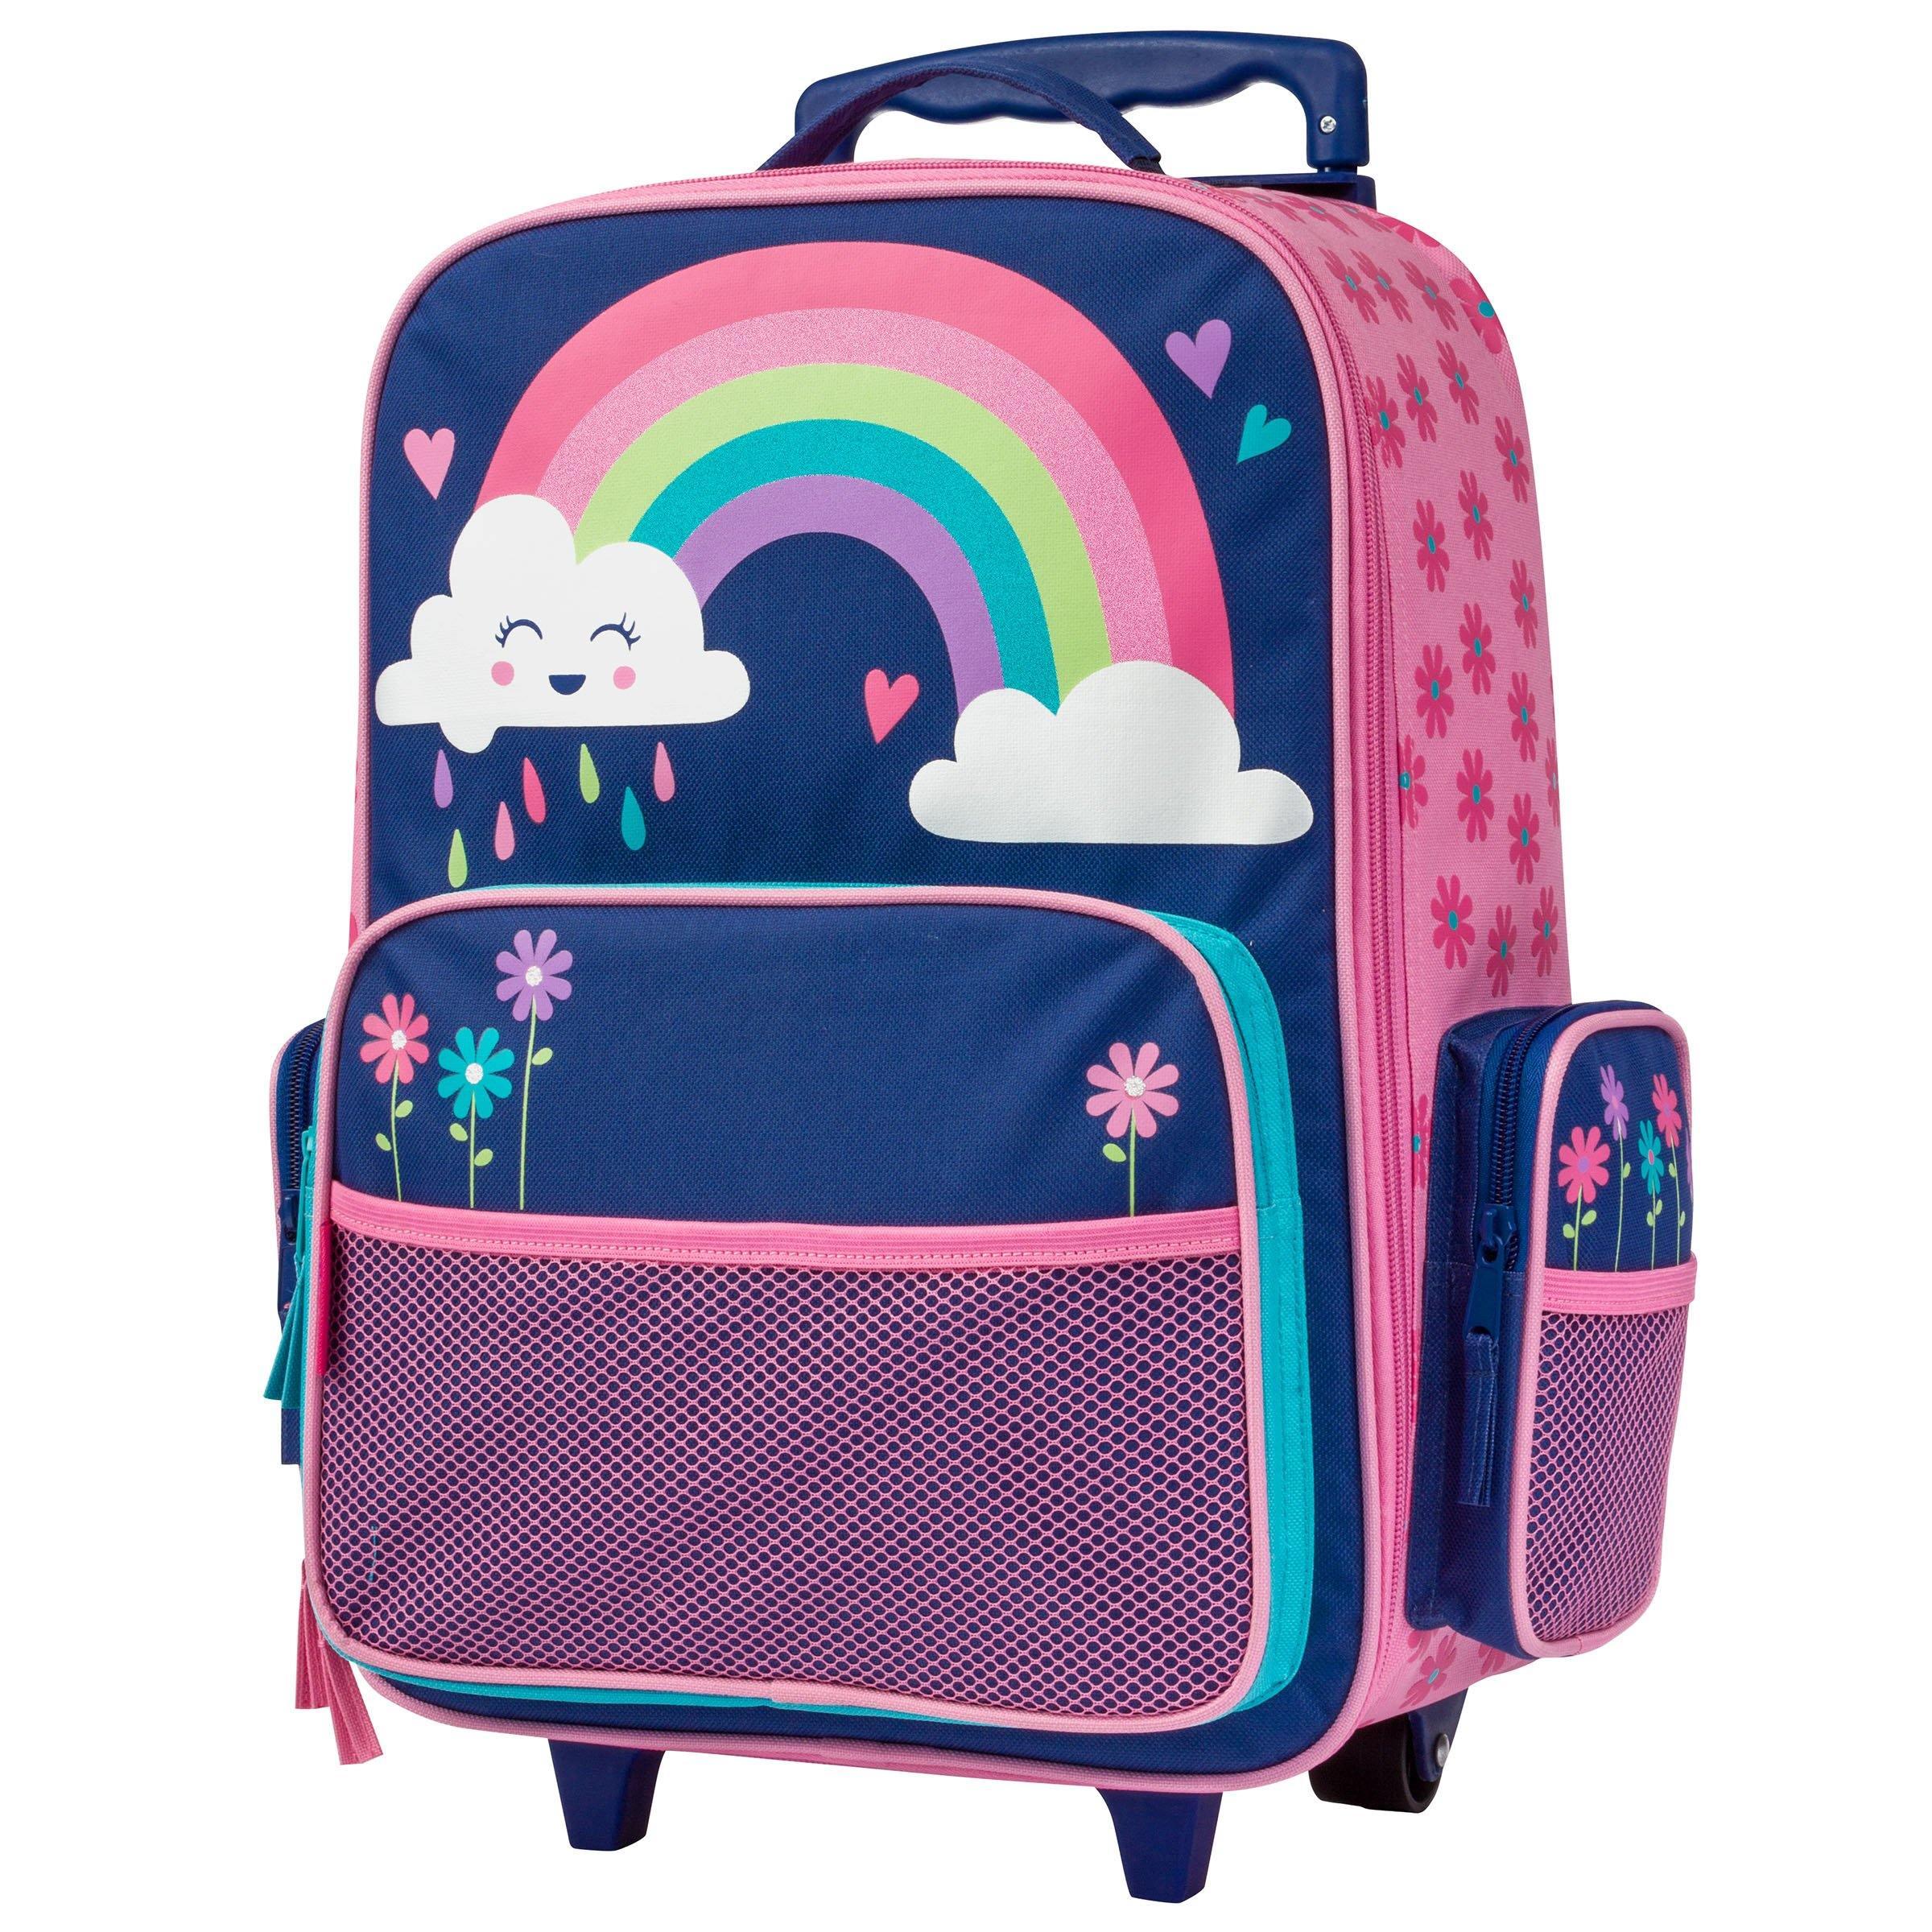 Stephen Joseph Classic Rolling Luggage 18 inch Rainbow - BumbleToys - 5-7 Years, Backpack, Cecil, Girls, Pre-Order, School Supplies